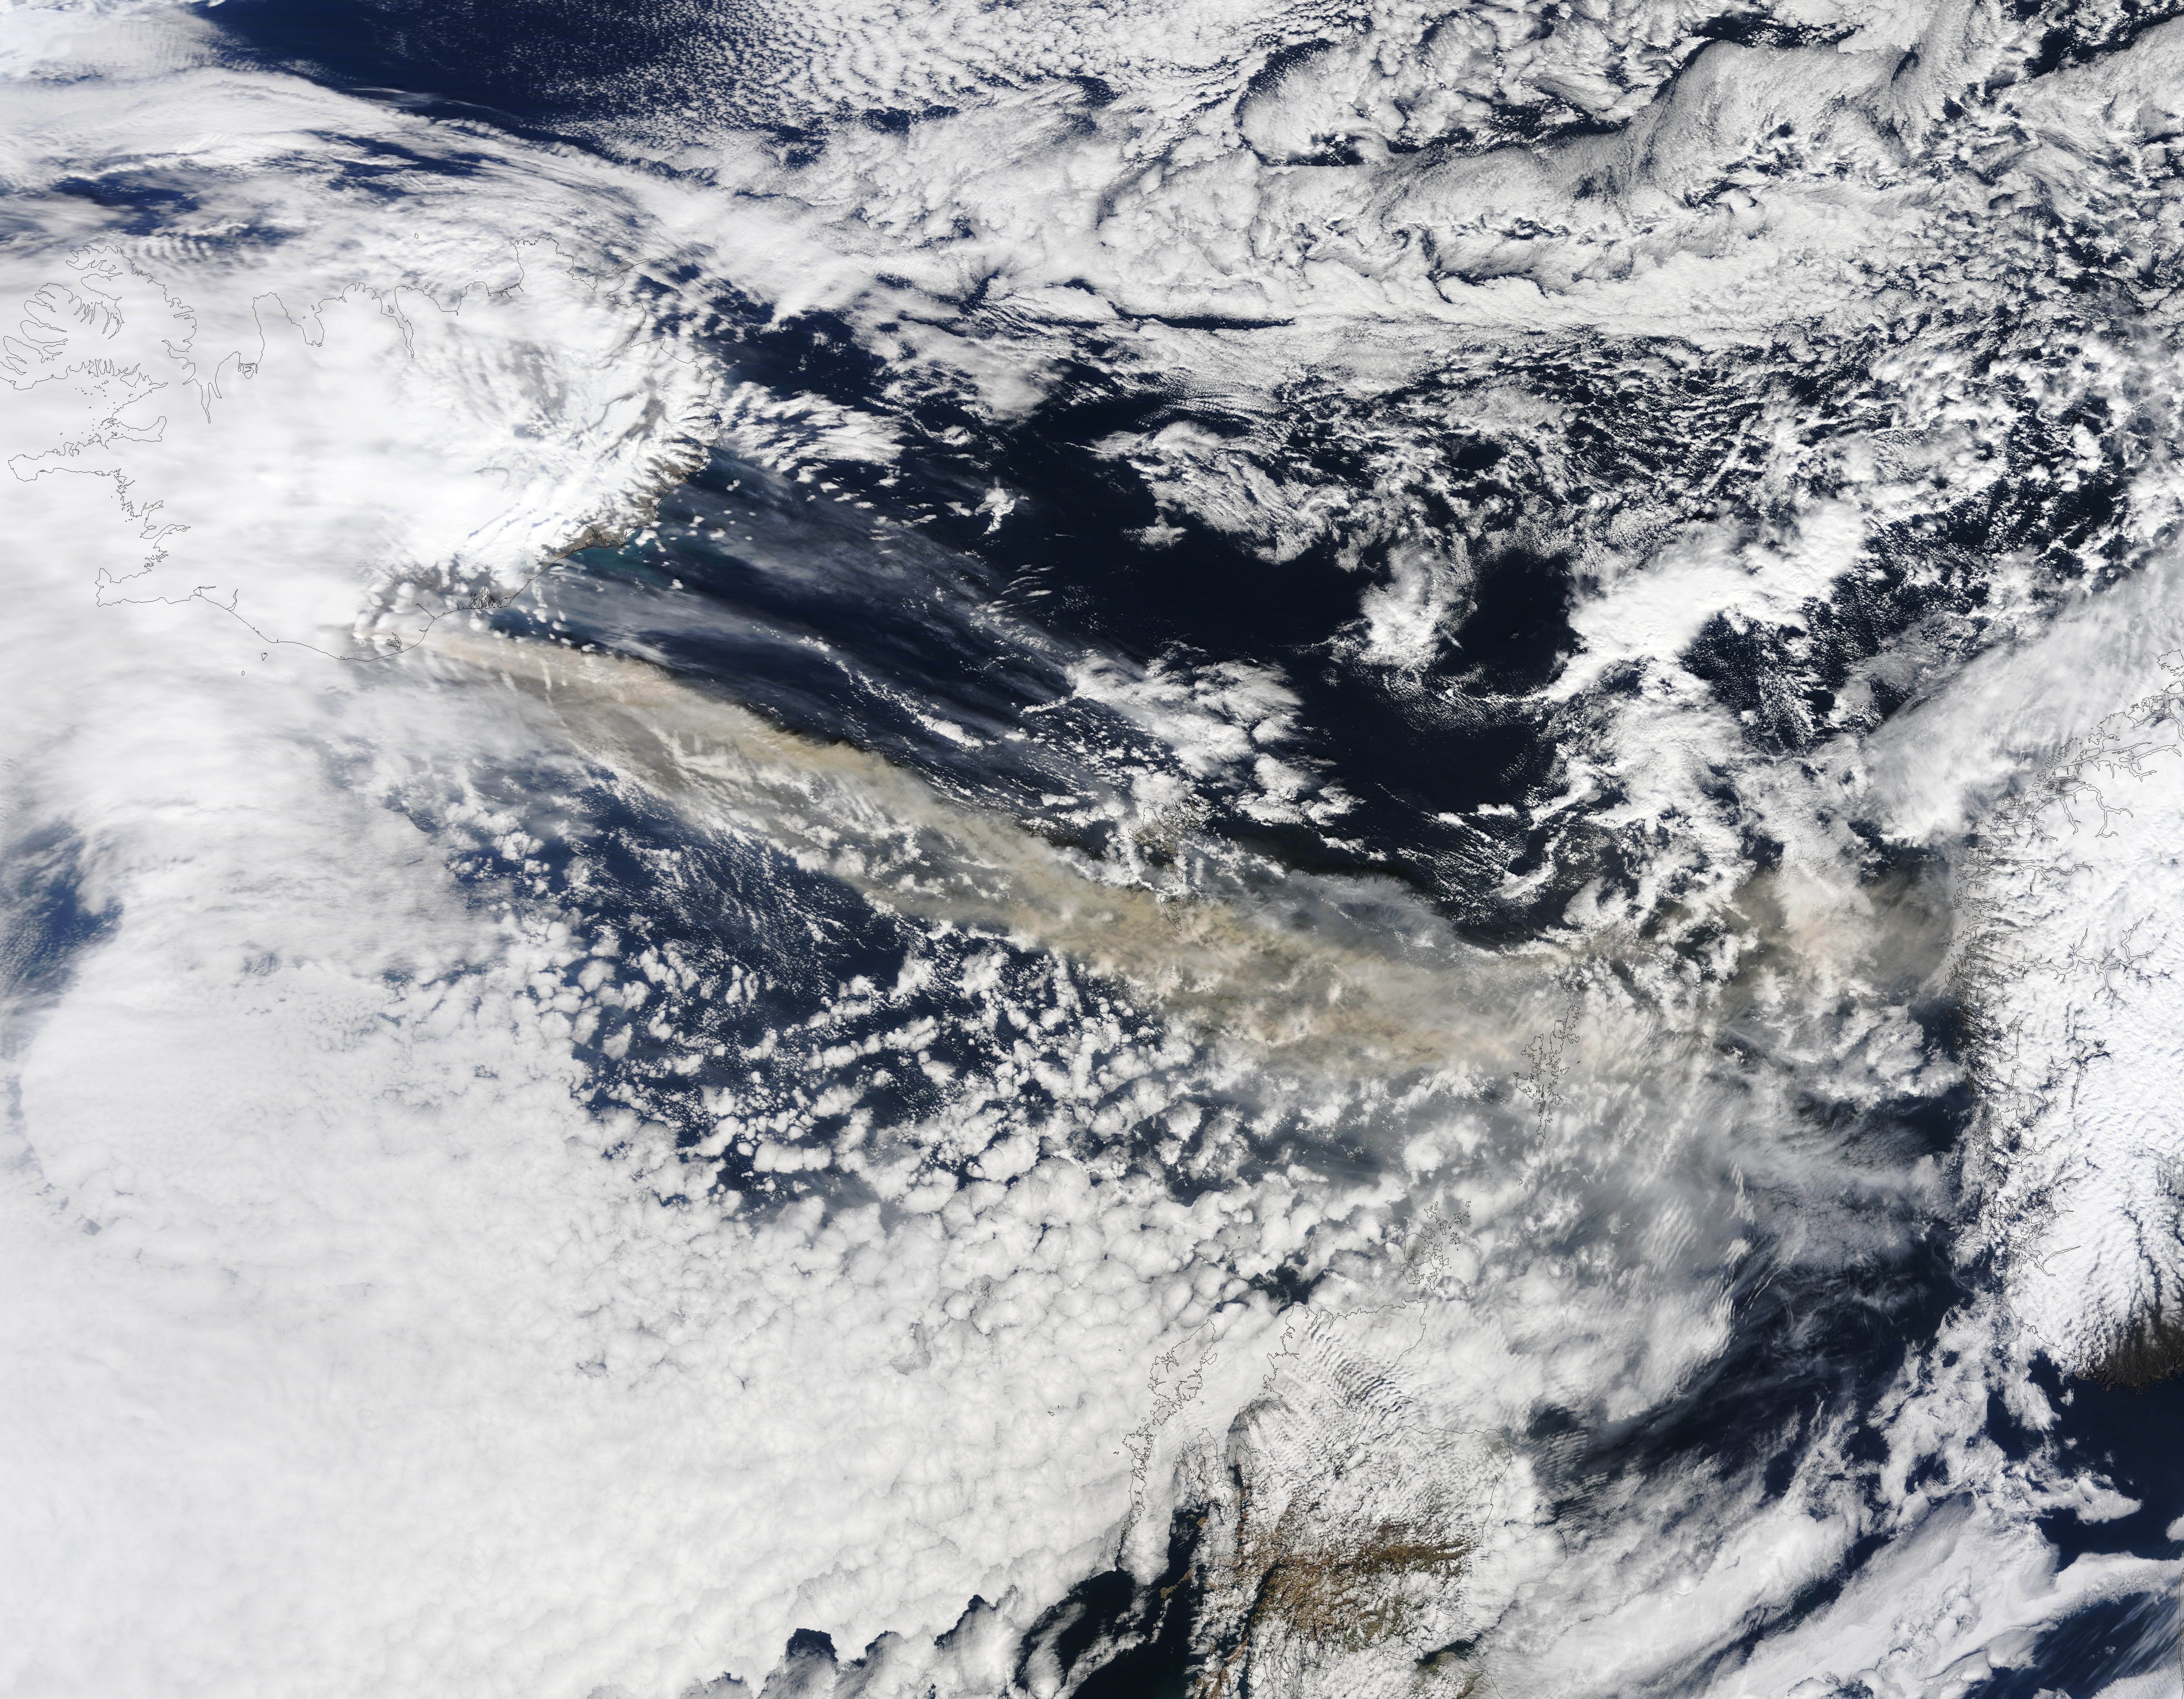 Ash Plume across the North Atlantic - related image preview